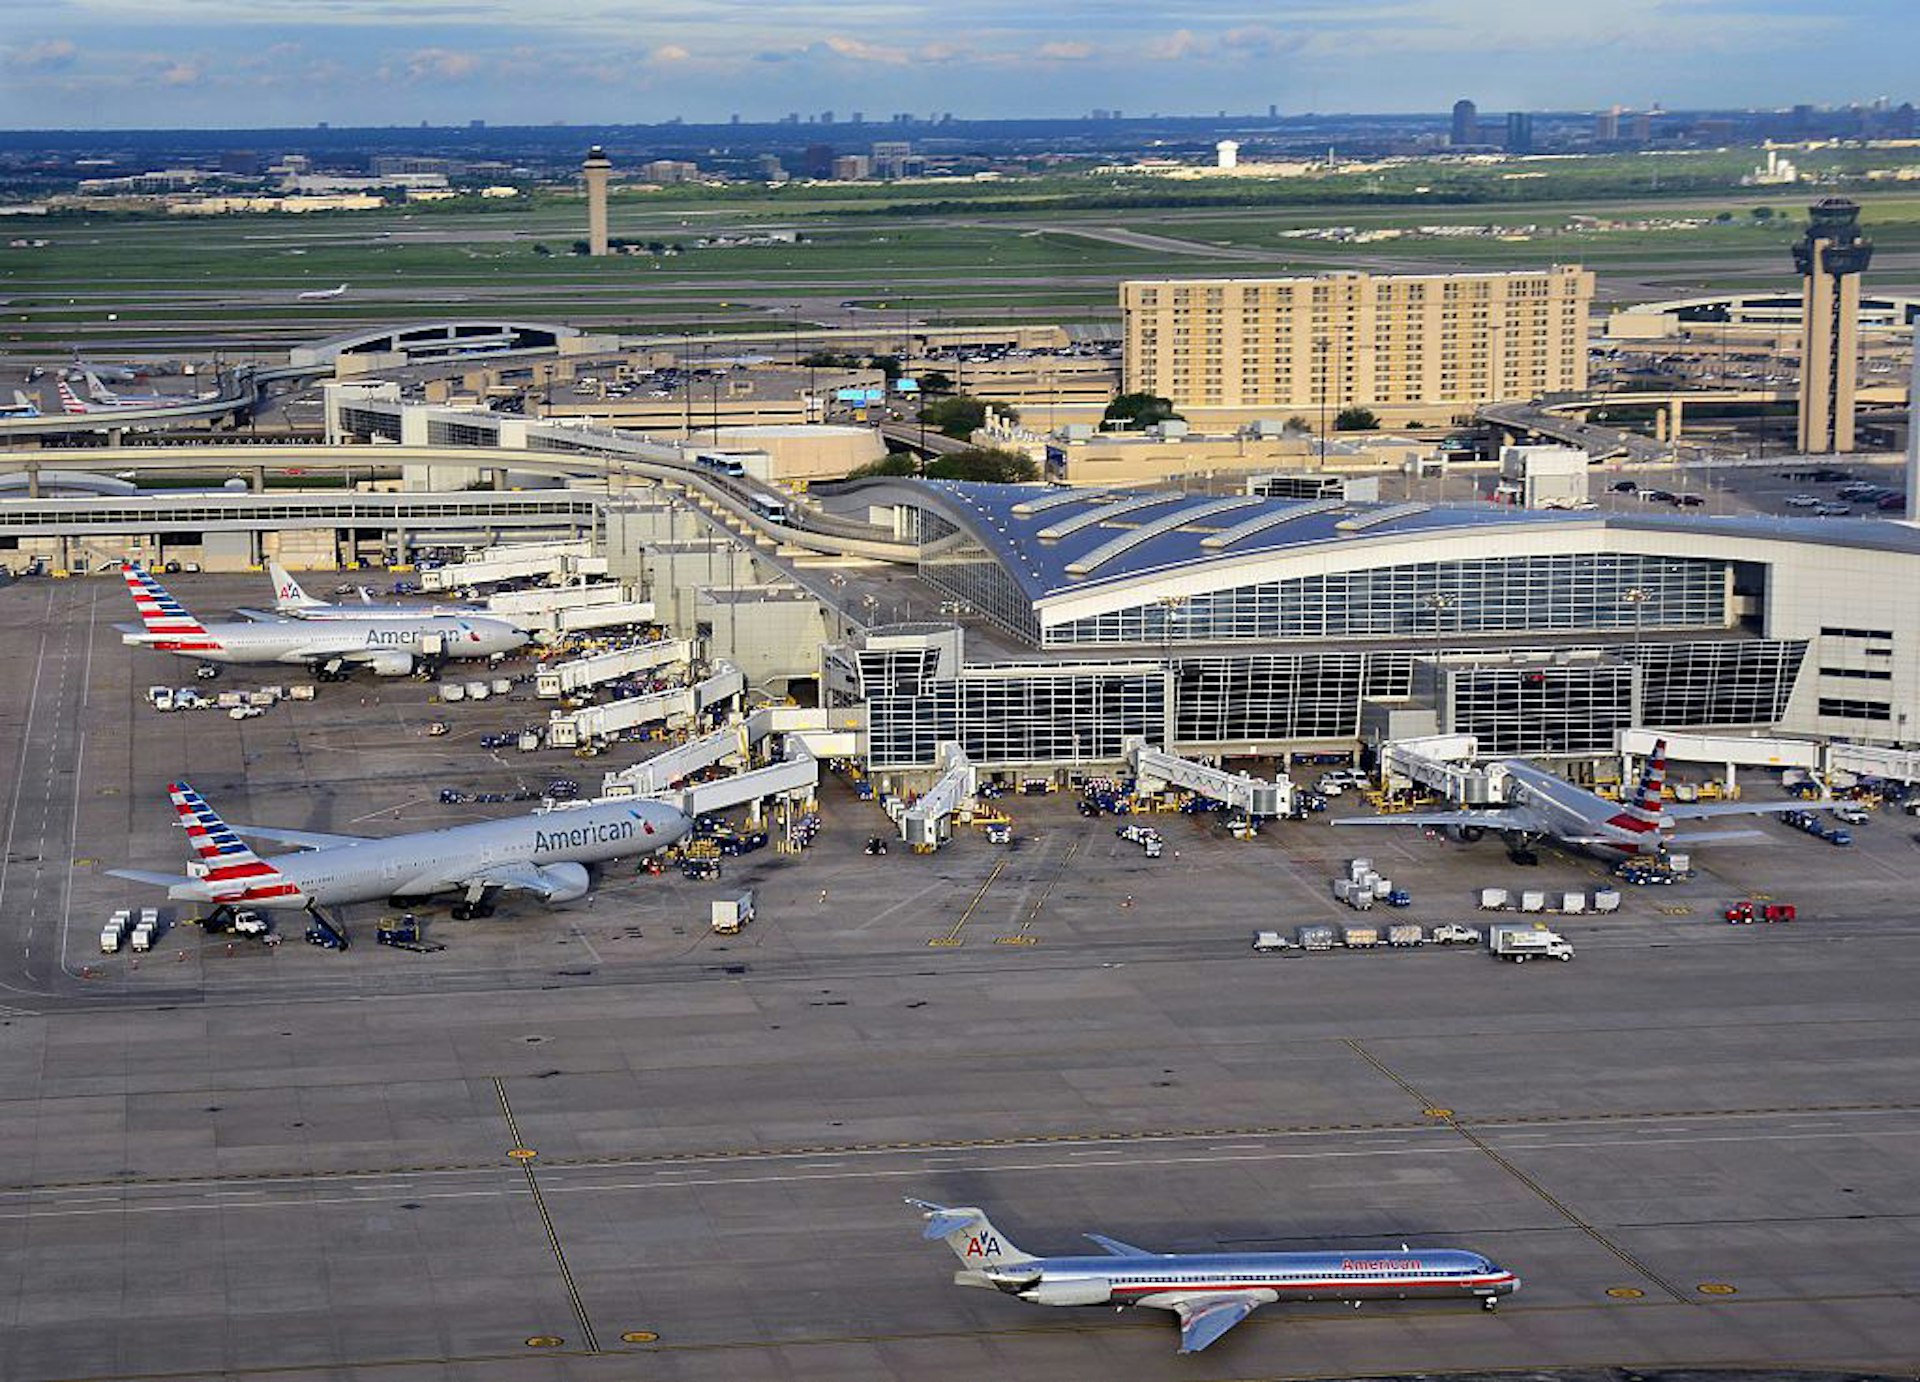 Dallas-Fort Worth International Airport has become the world's busiest